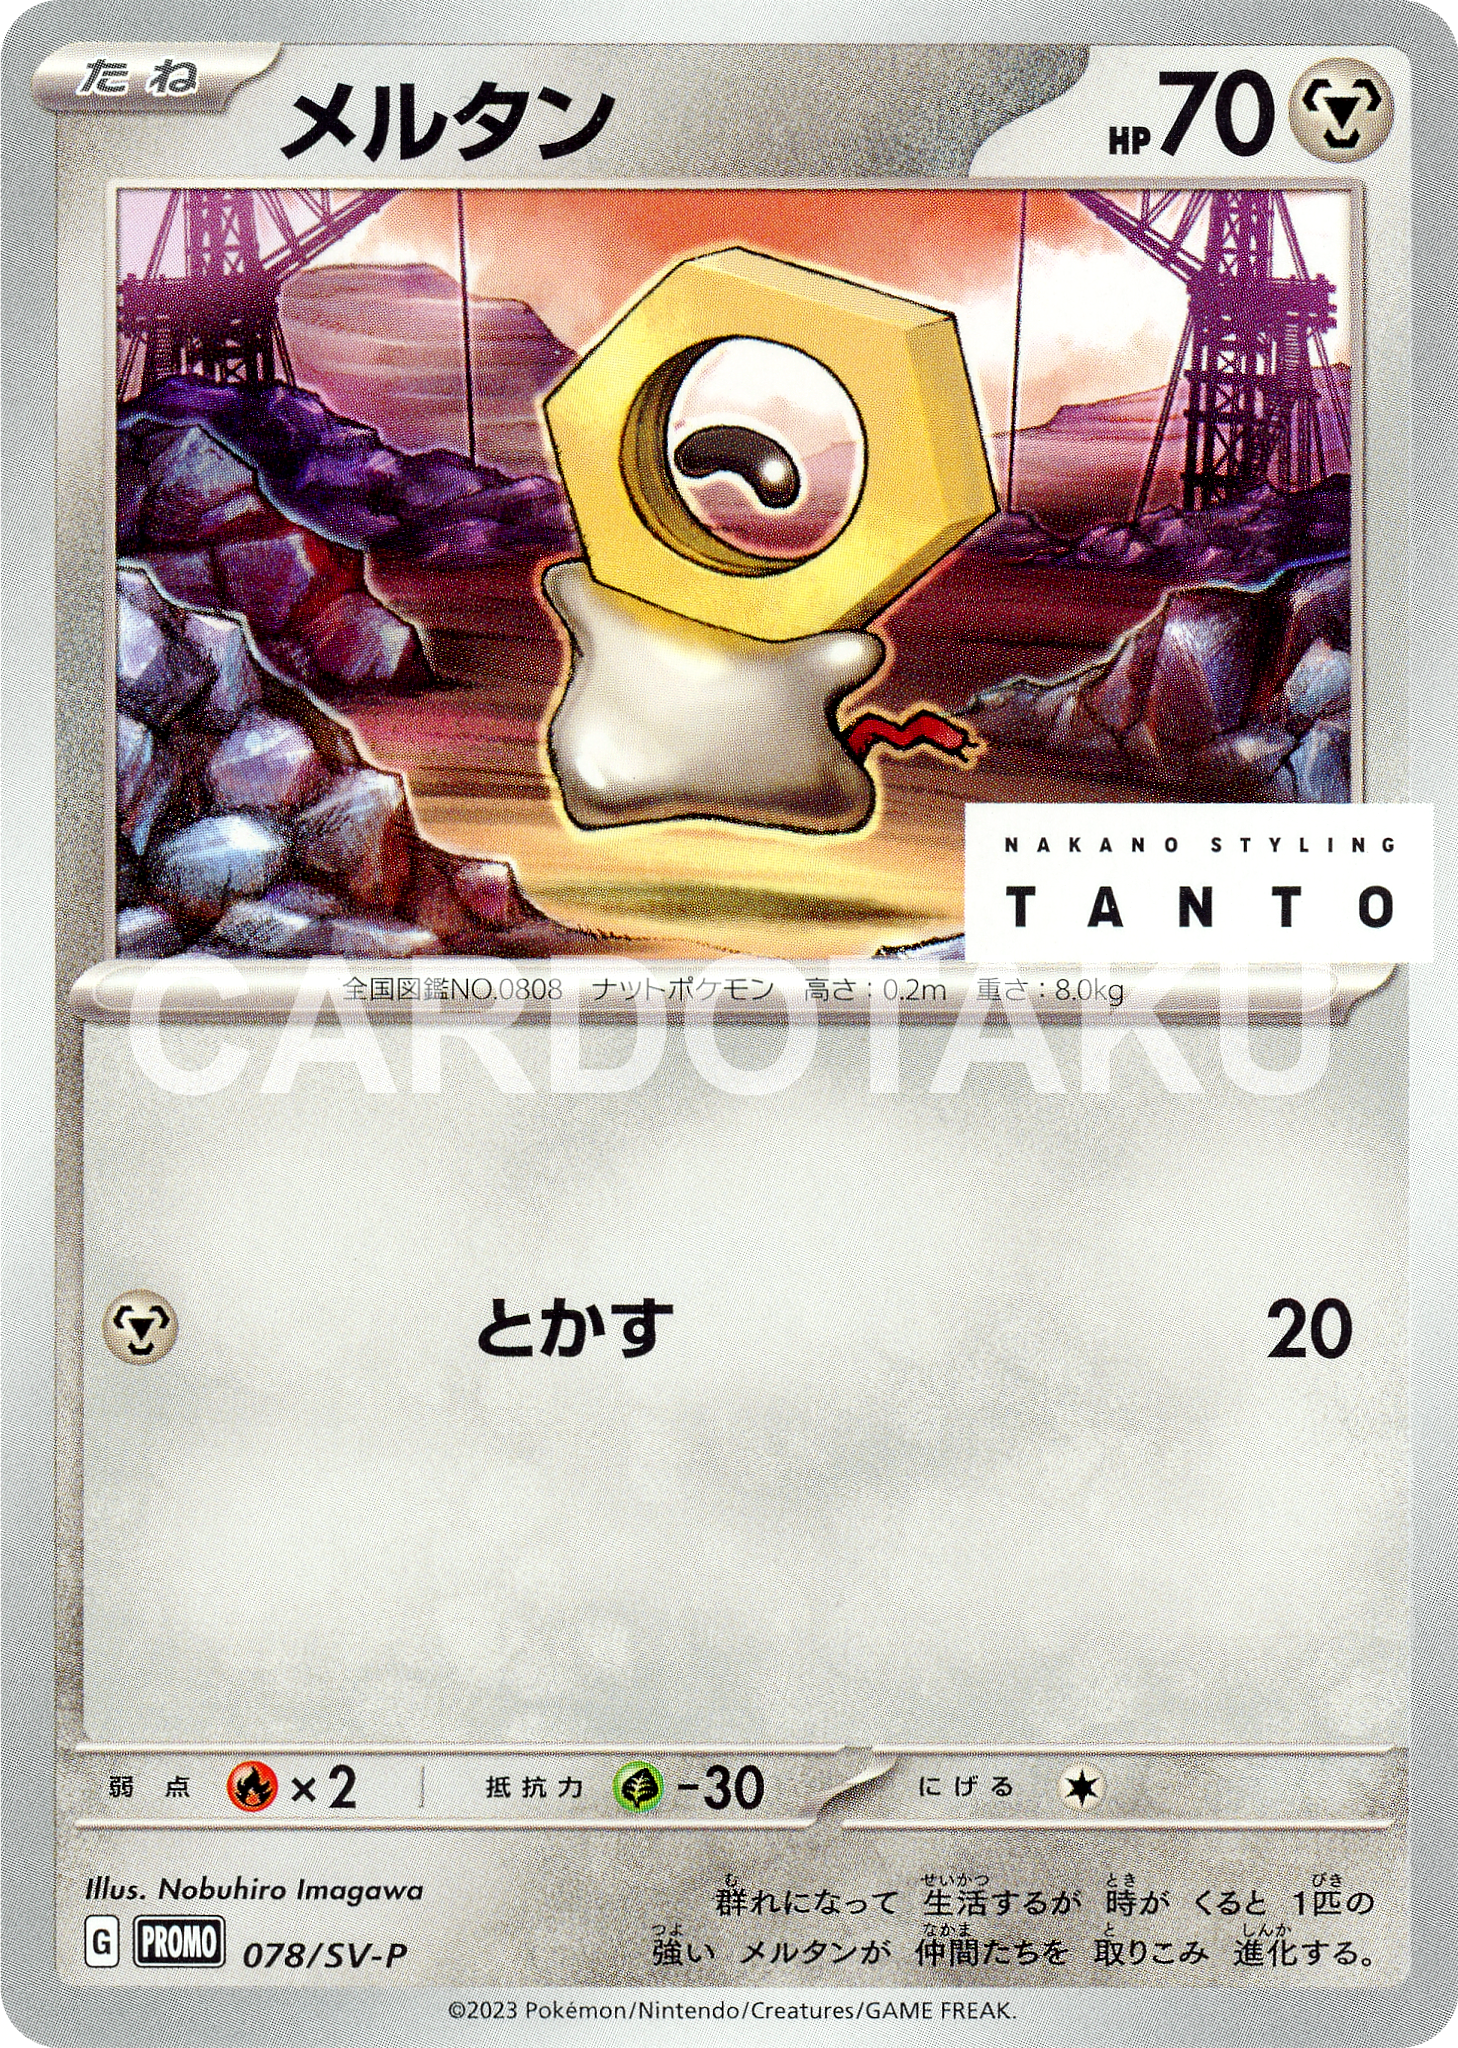 Pokémon Card Game SCARLET & VIOLET PROMO 078/SV-P  From the collaboration with "TANTO" "promotional booster pack"  Meltan